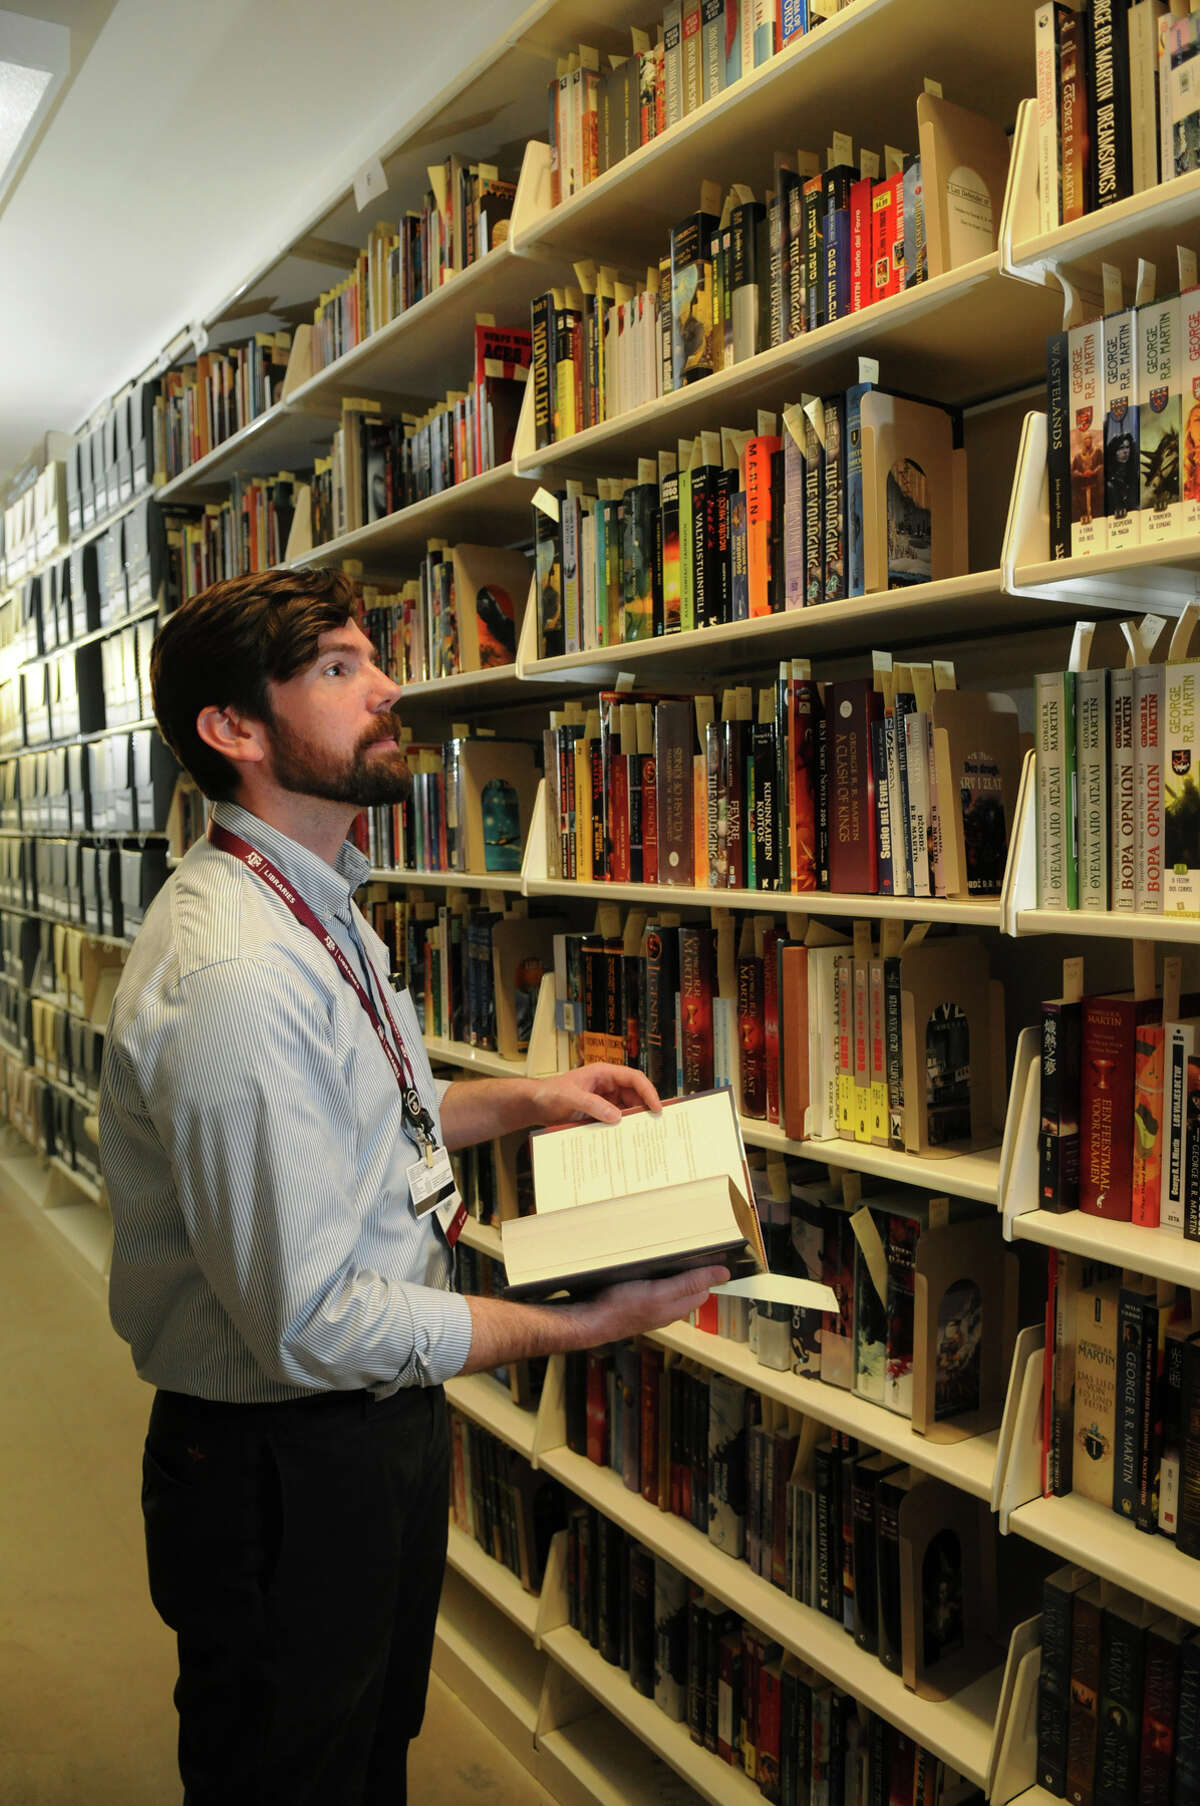 Kevin O'Sullivan, a curator at the Cushing Memorial Library and Archives, browses "The Wall," which houses works by George R.R. Martin.